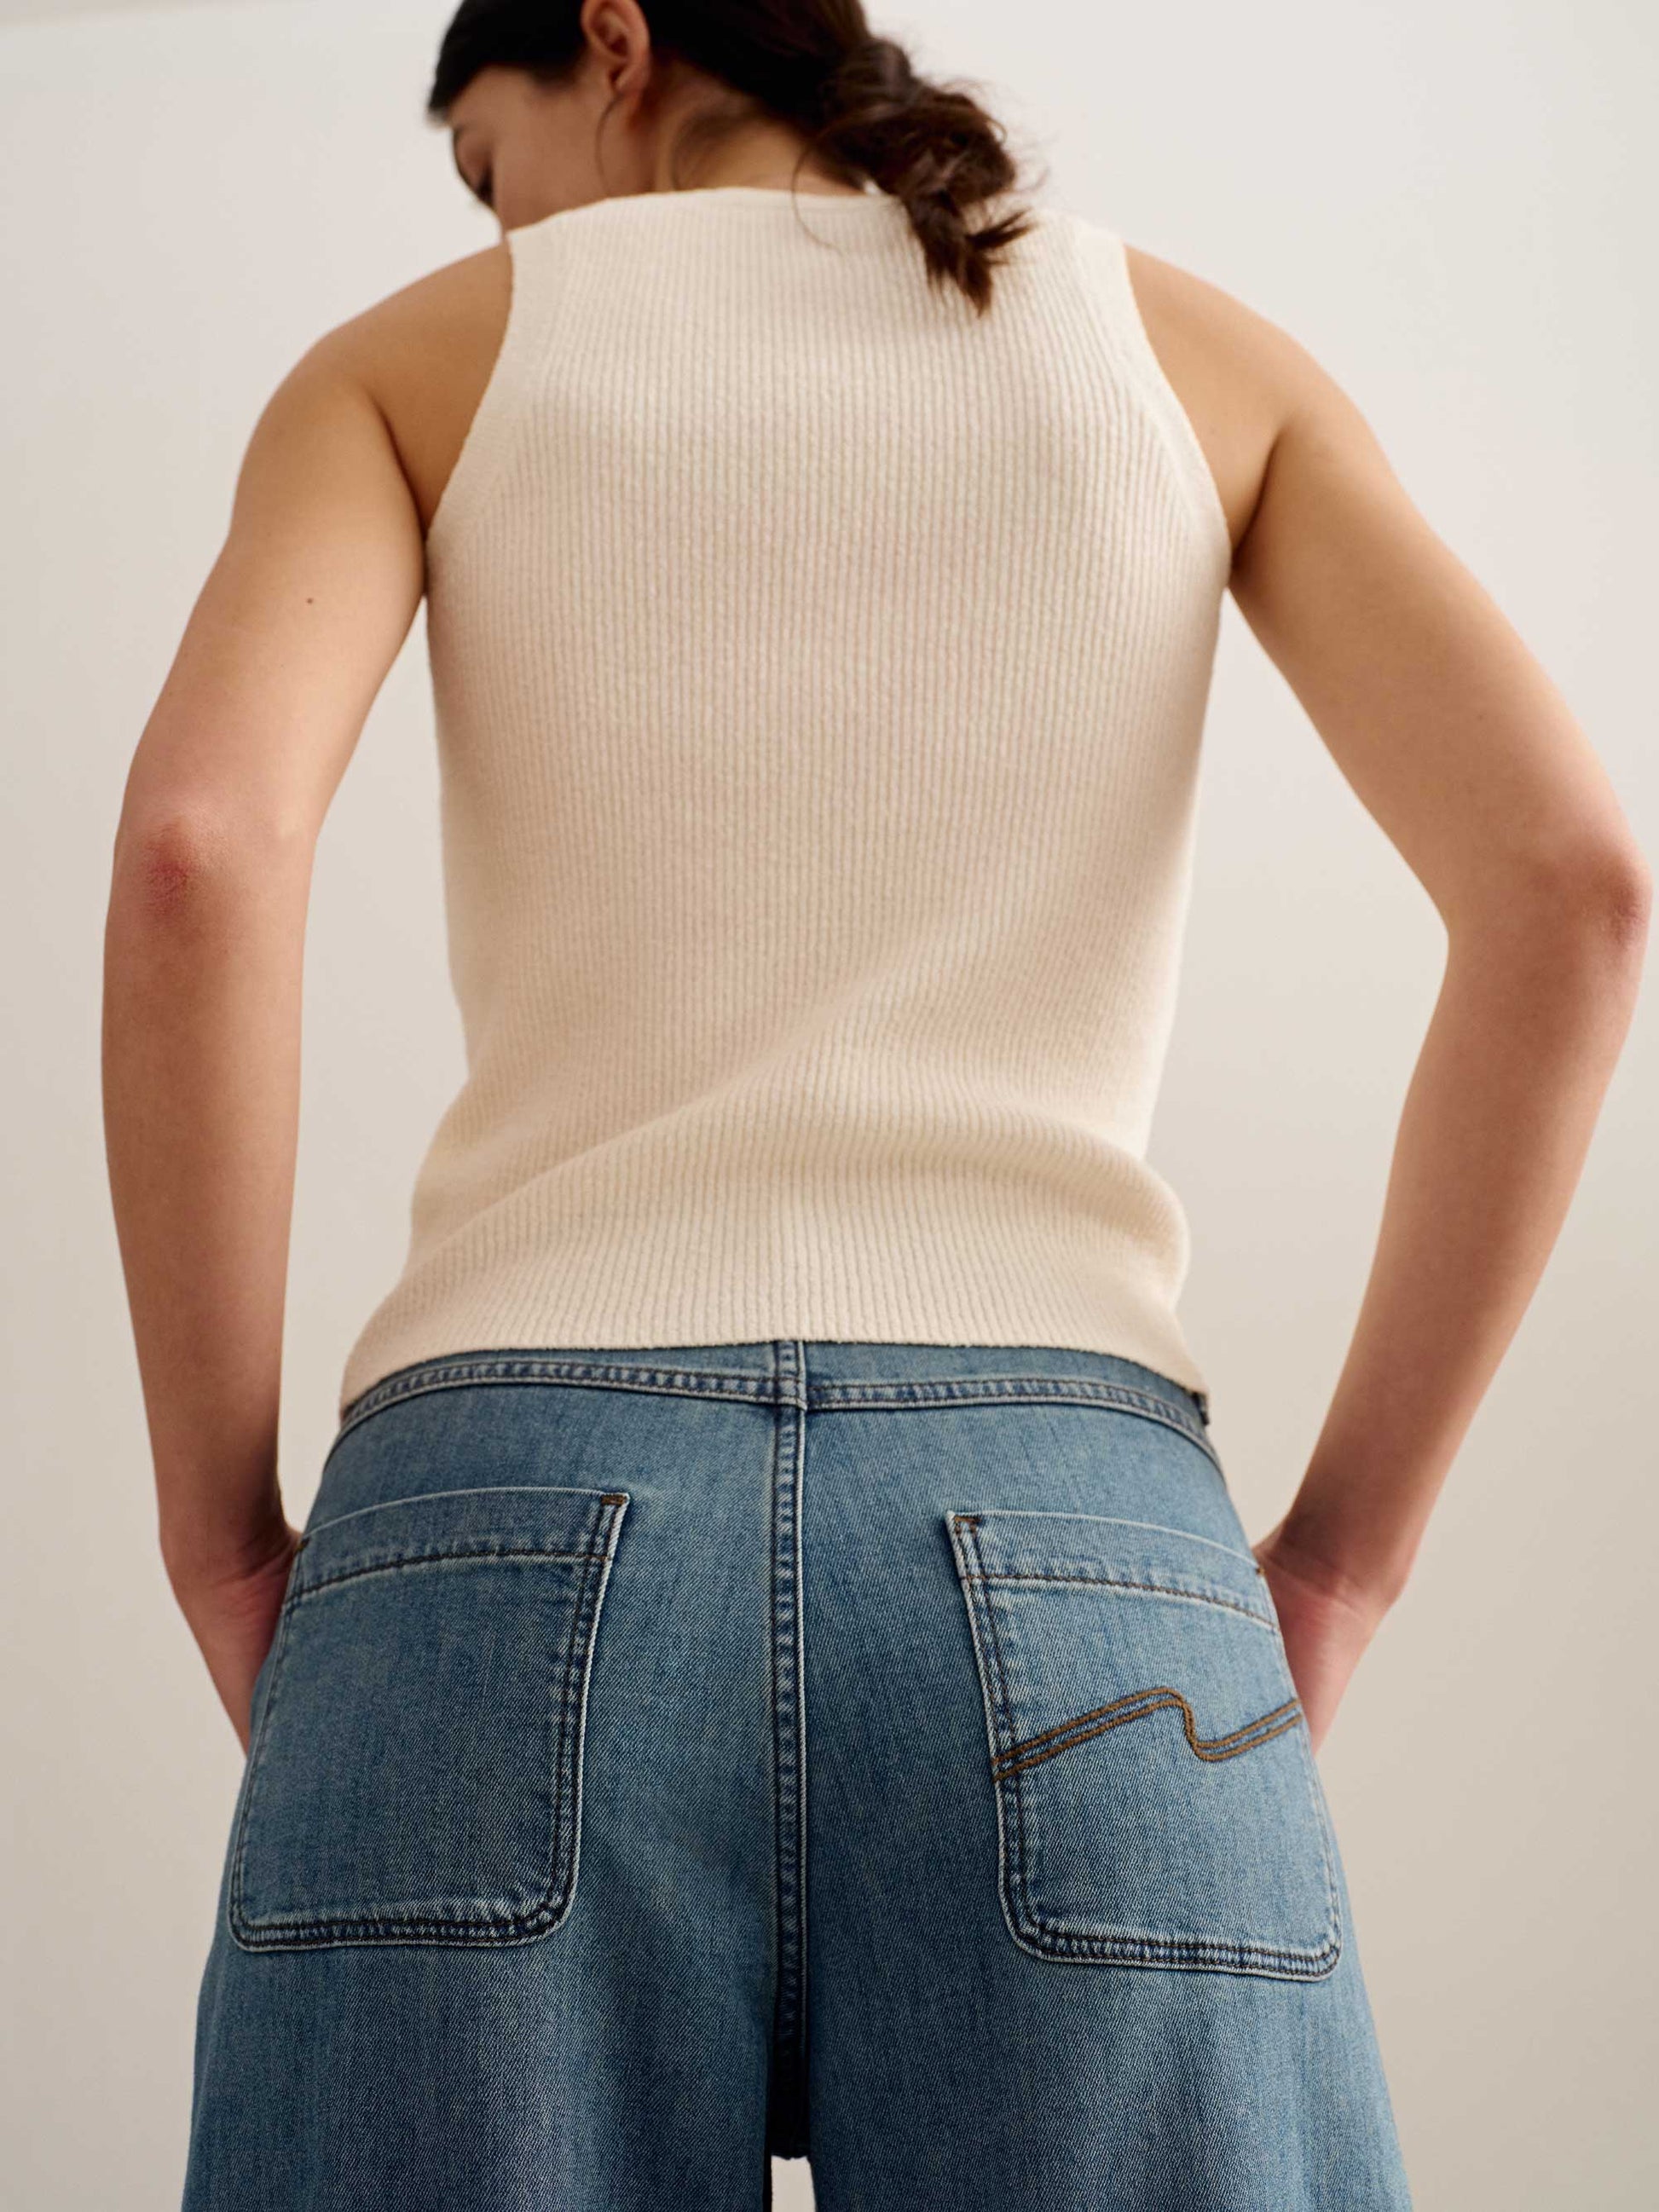 back of a woman wearing a white tank and blue jeans